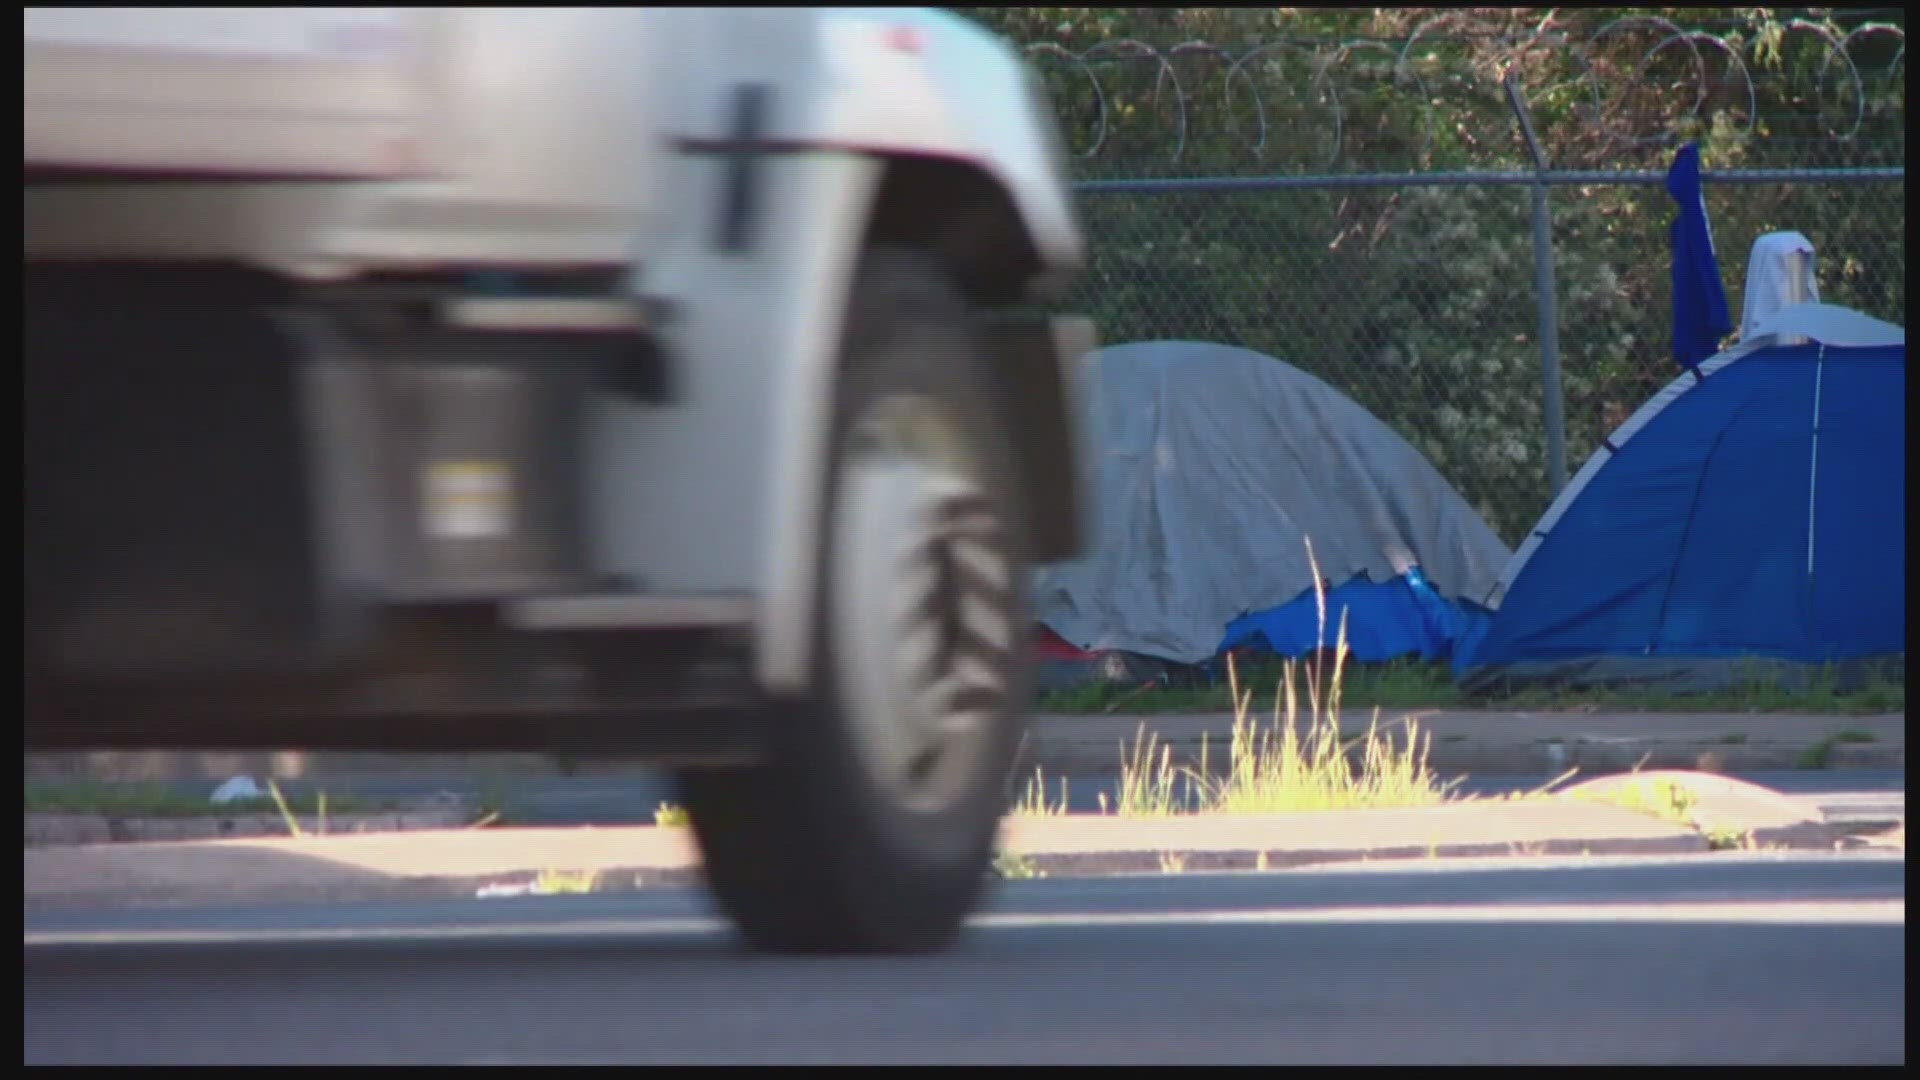 Officials said the report doesn't reflect the true number of unhoused people in the county.